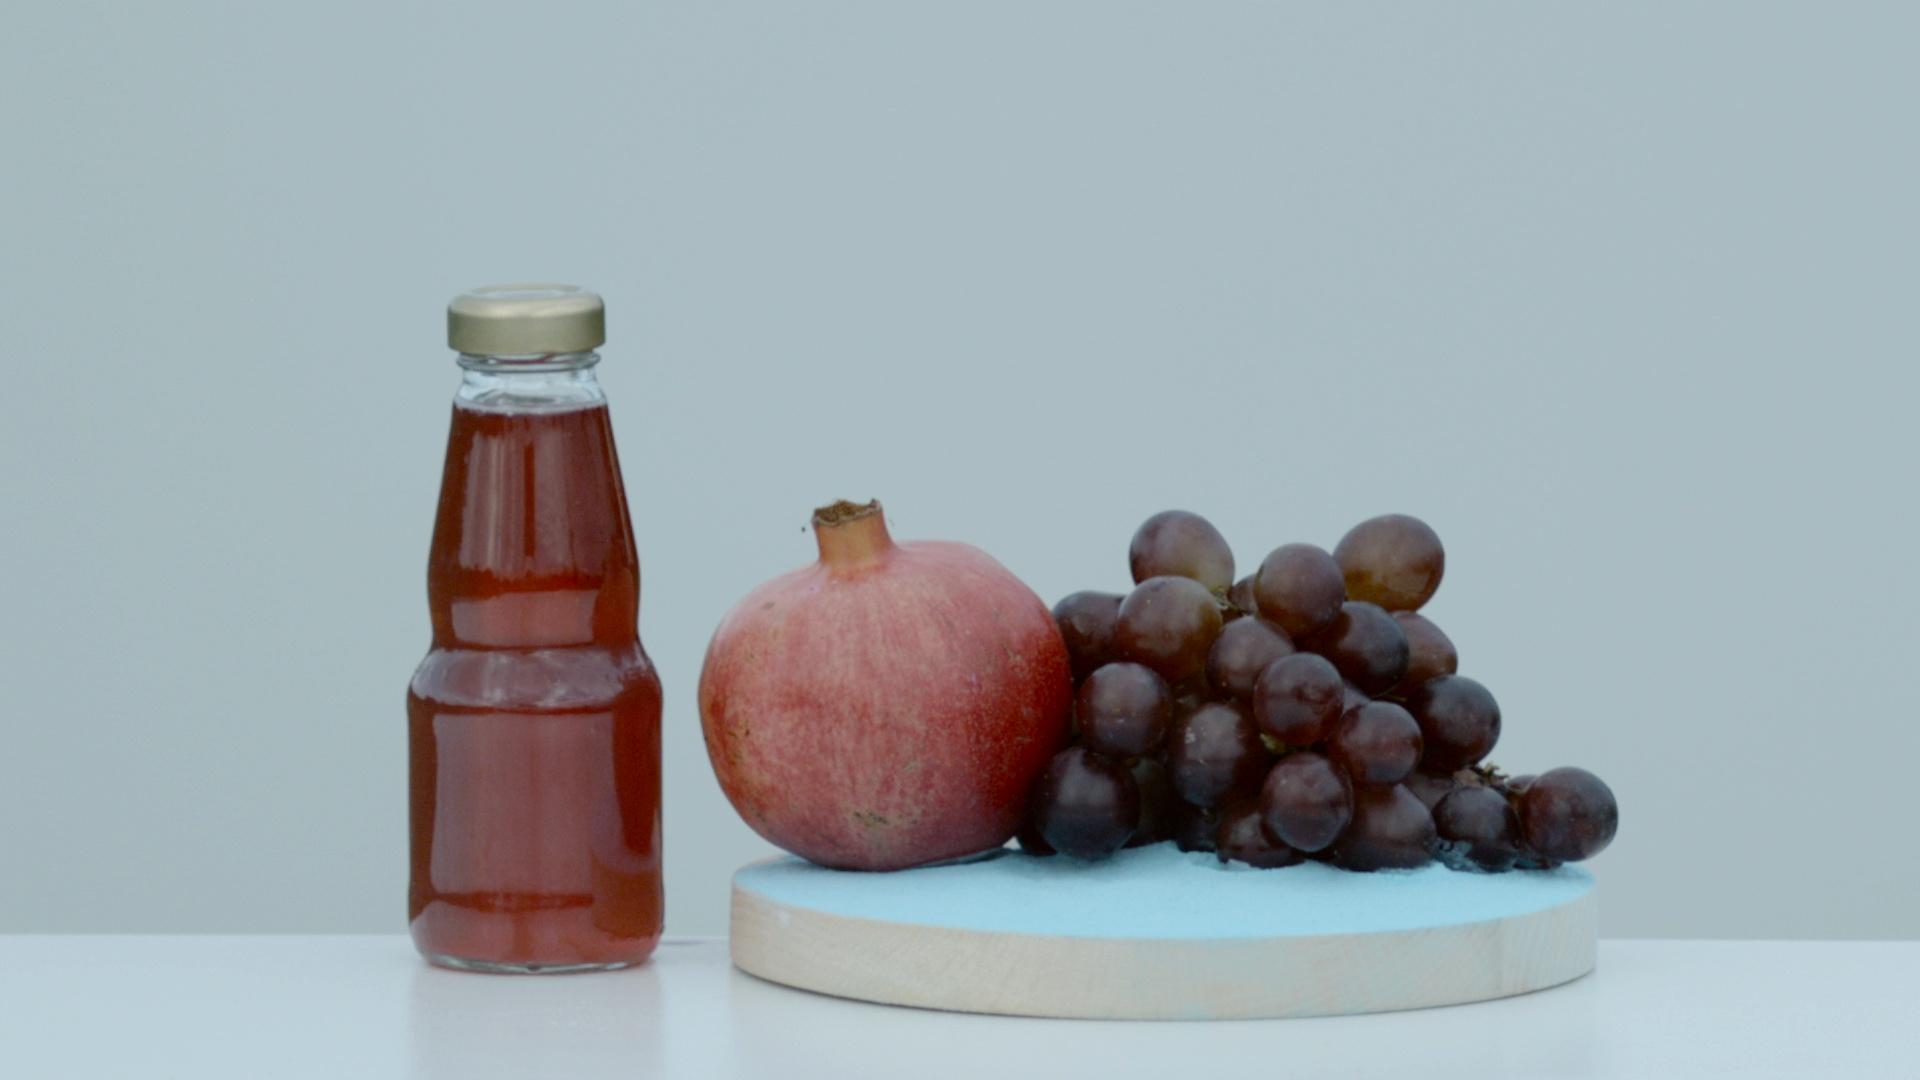 Video: Grape juice, pomegranate and grapes exploding, Ultra Slow